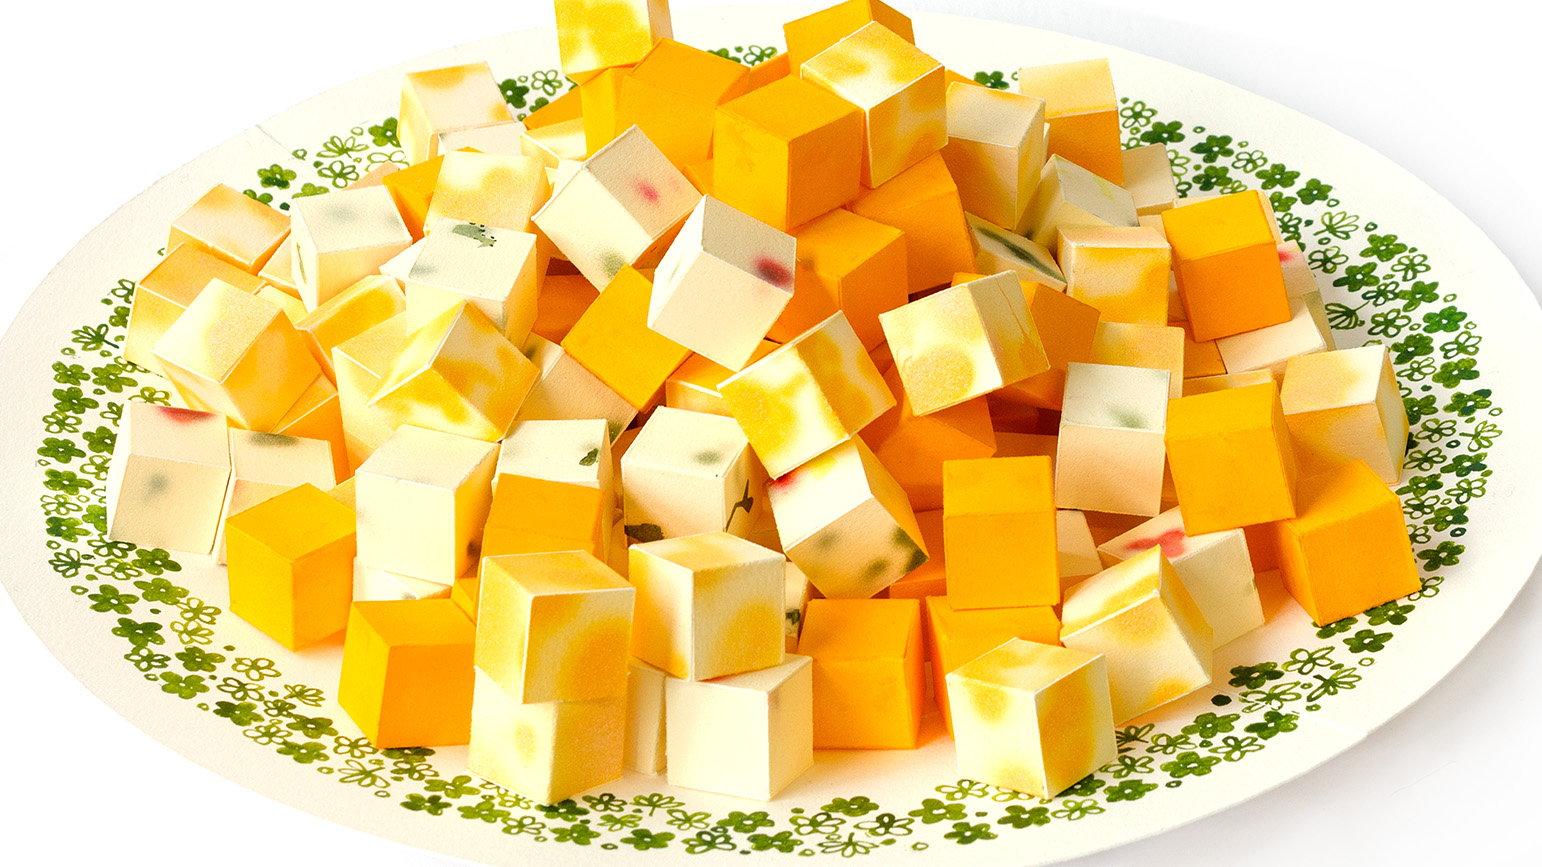 A plate of cheese cubes all made from paper